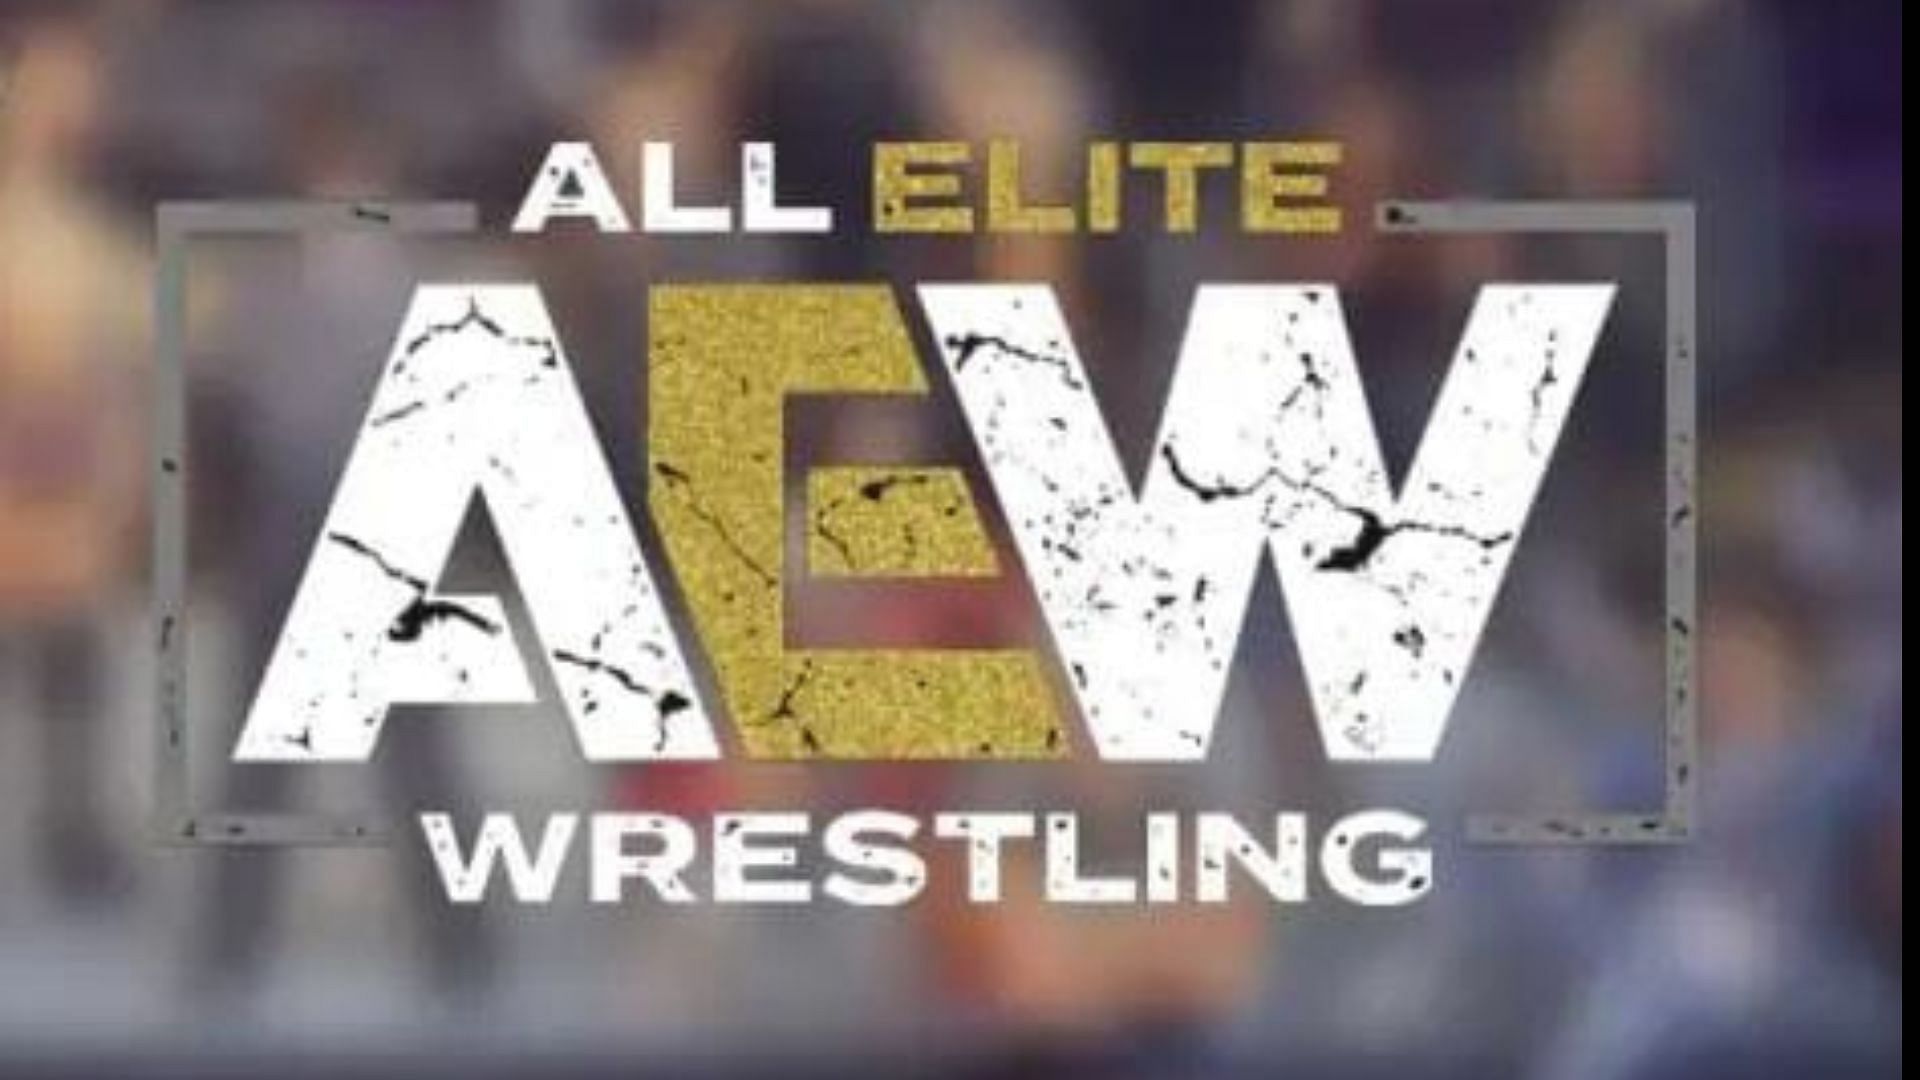 AEW is a major player in the wrestling industry